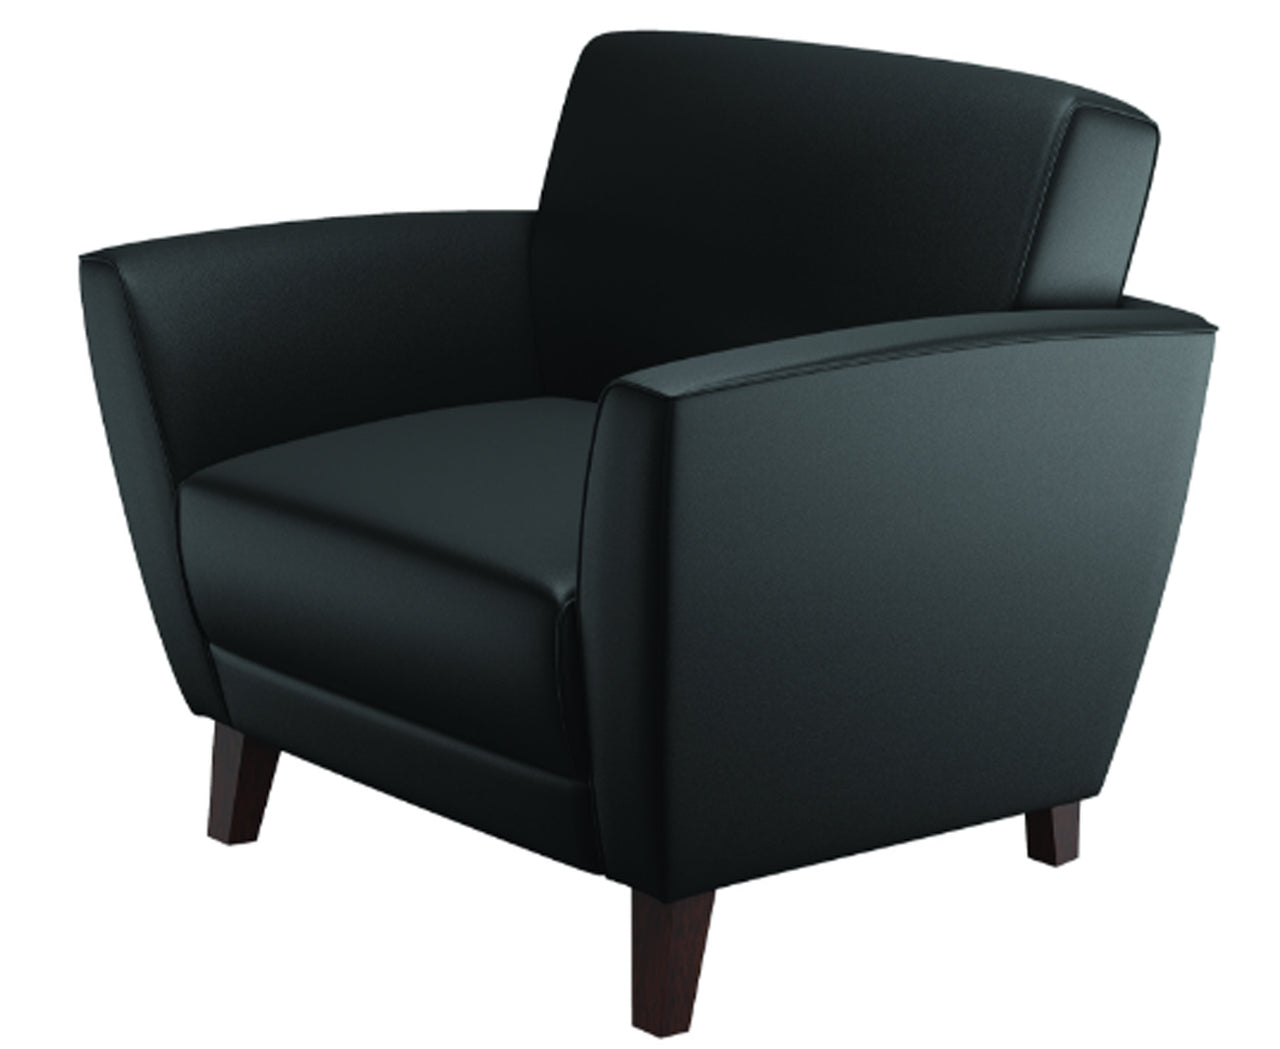 Compel Levengo Lounge Chair - New CLOSEOUT